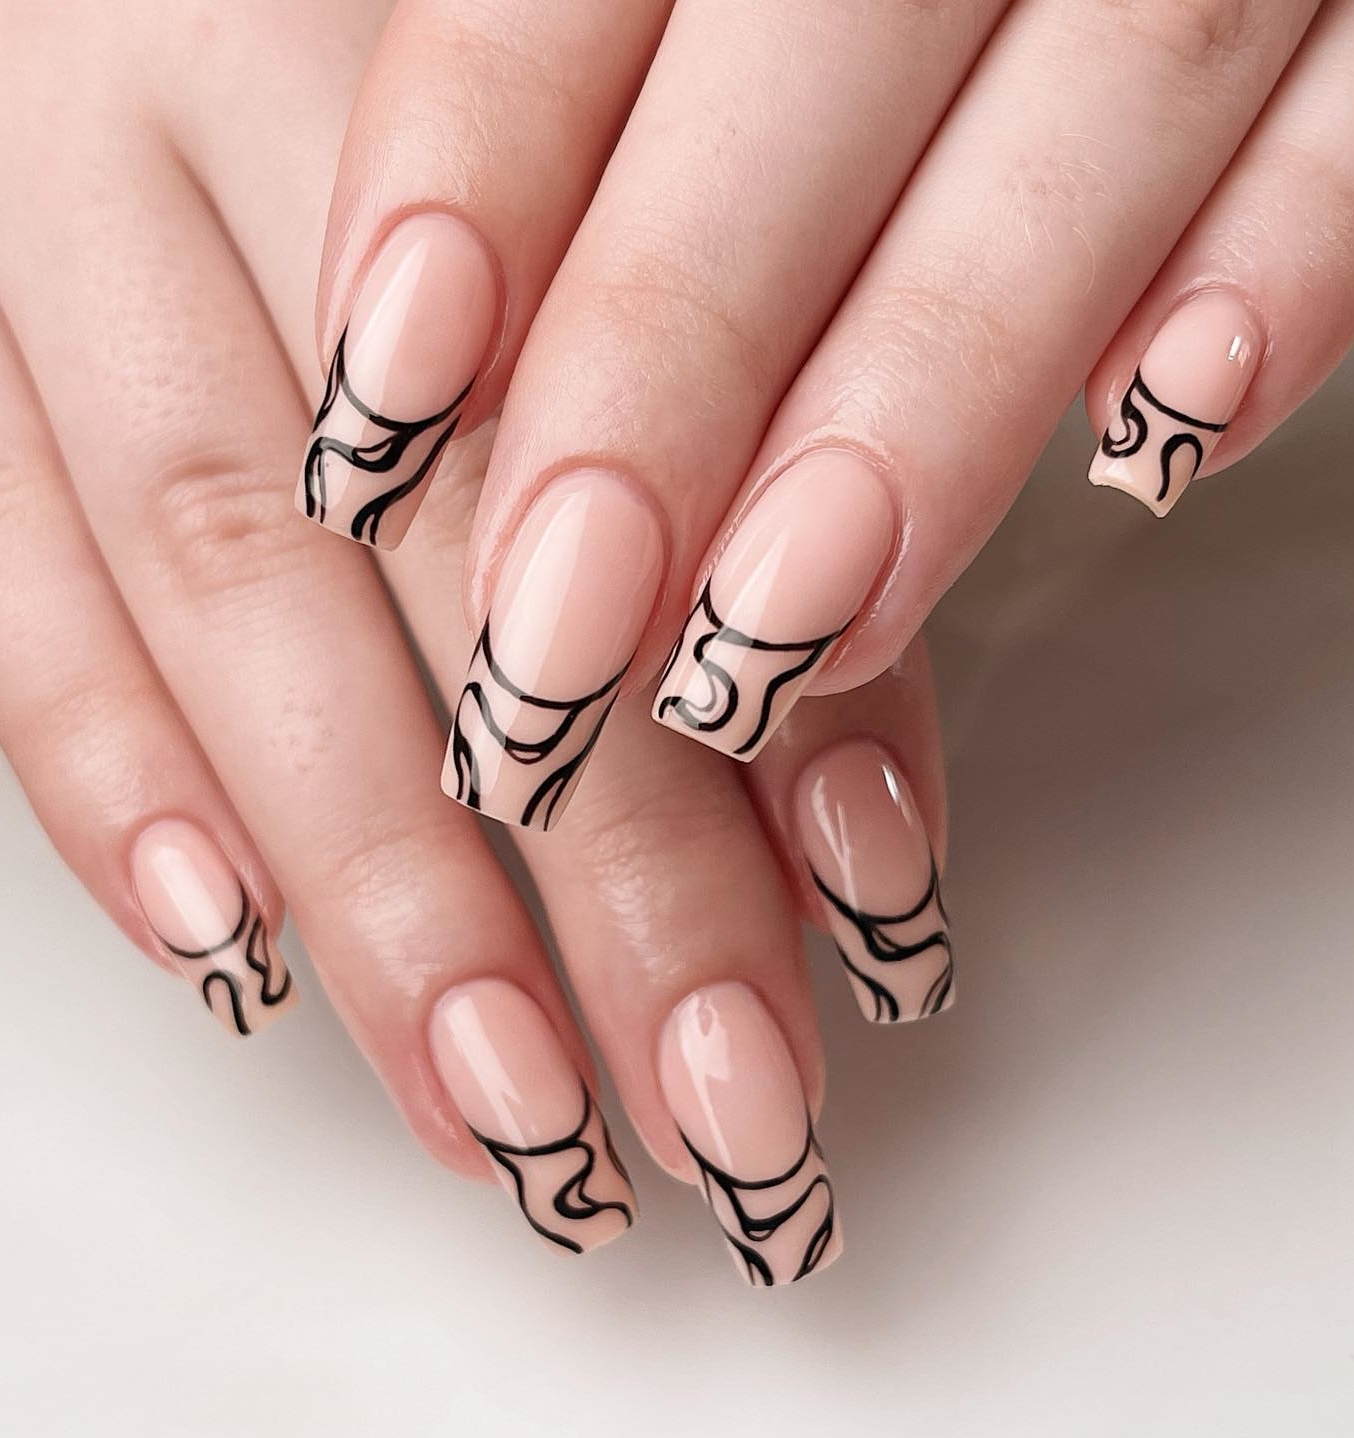 Long Square Nails with Black Lines on Tips